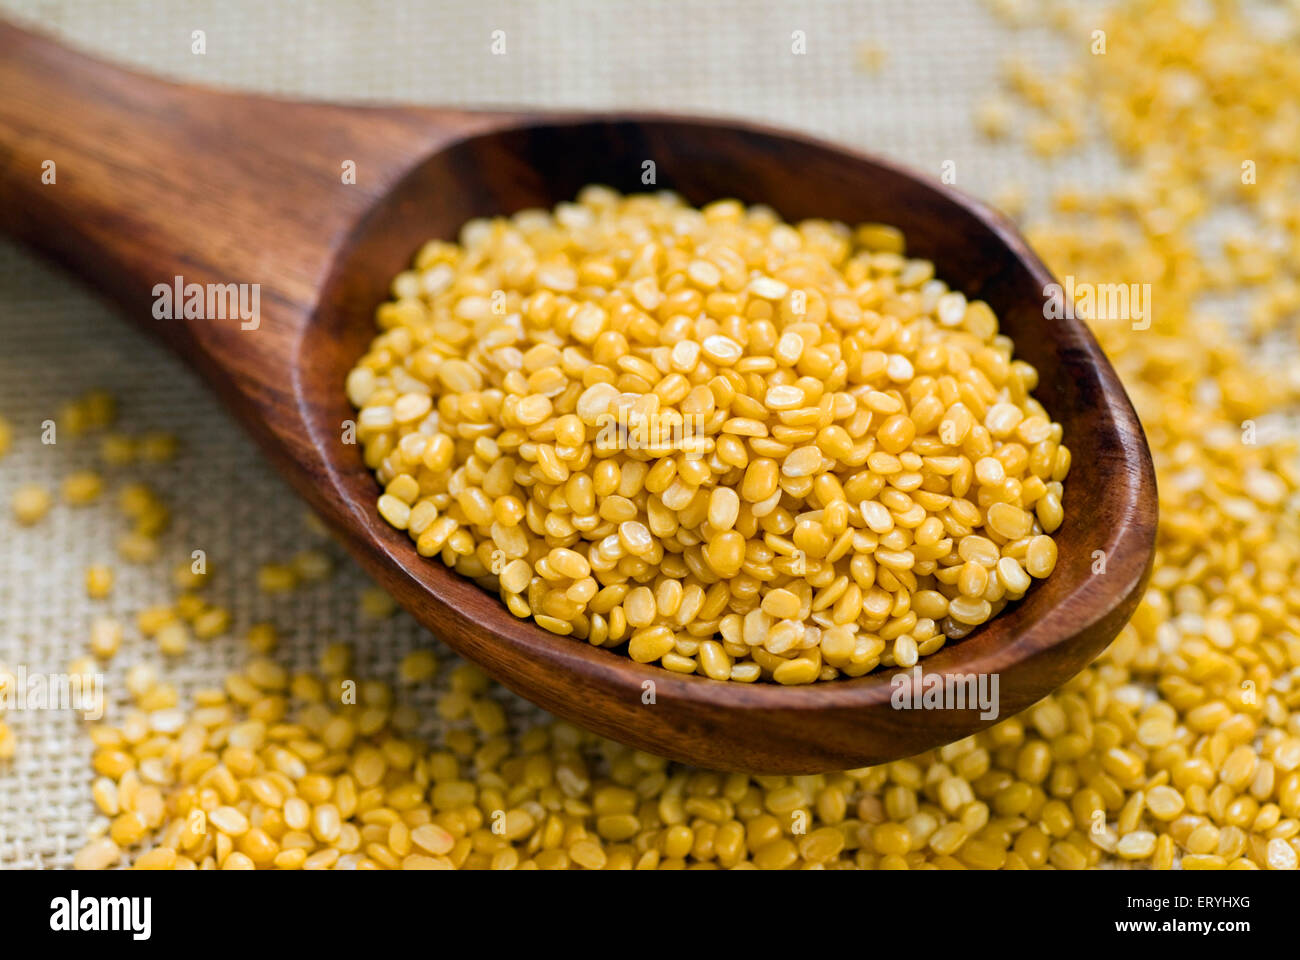 Grains ; moong dal split mung beans phaseolus mungo in wooden ladle Stock Photo